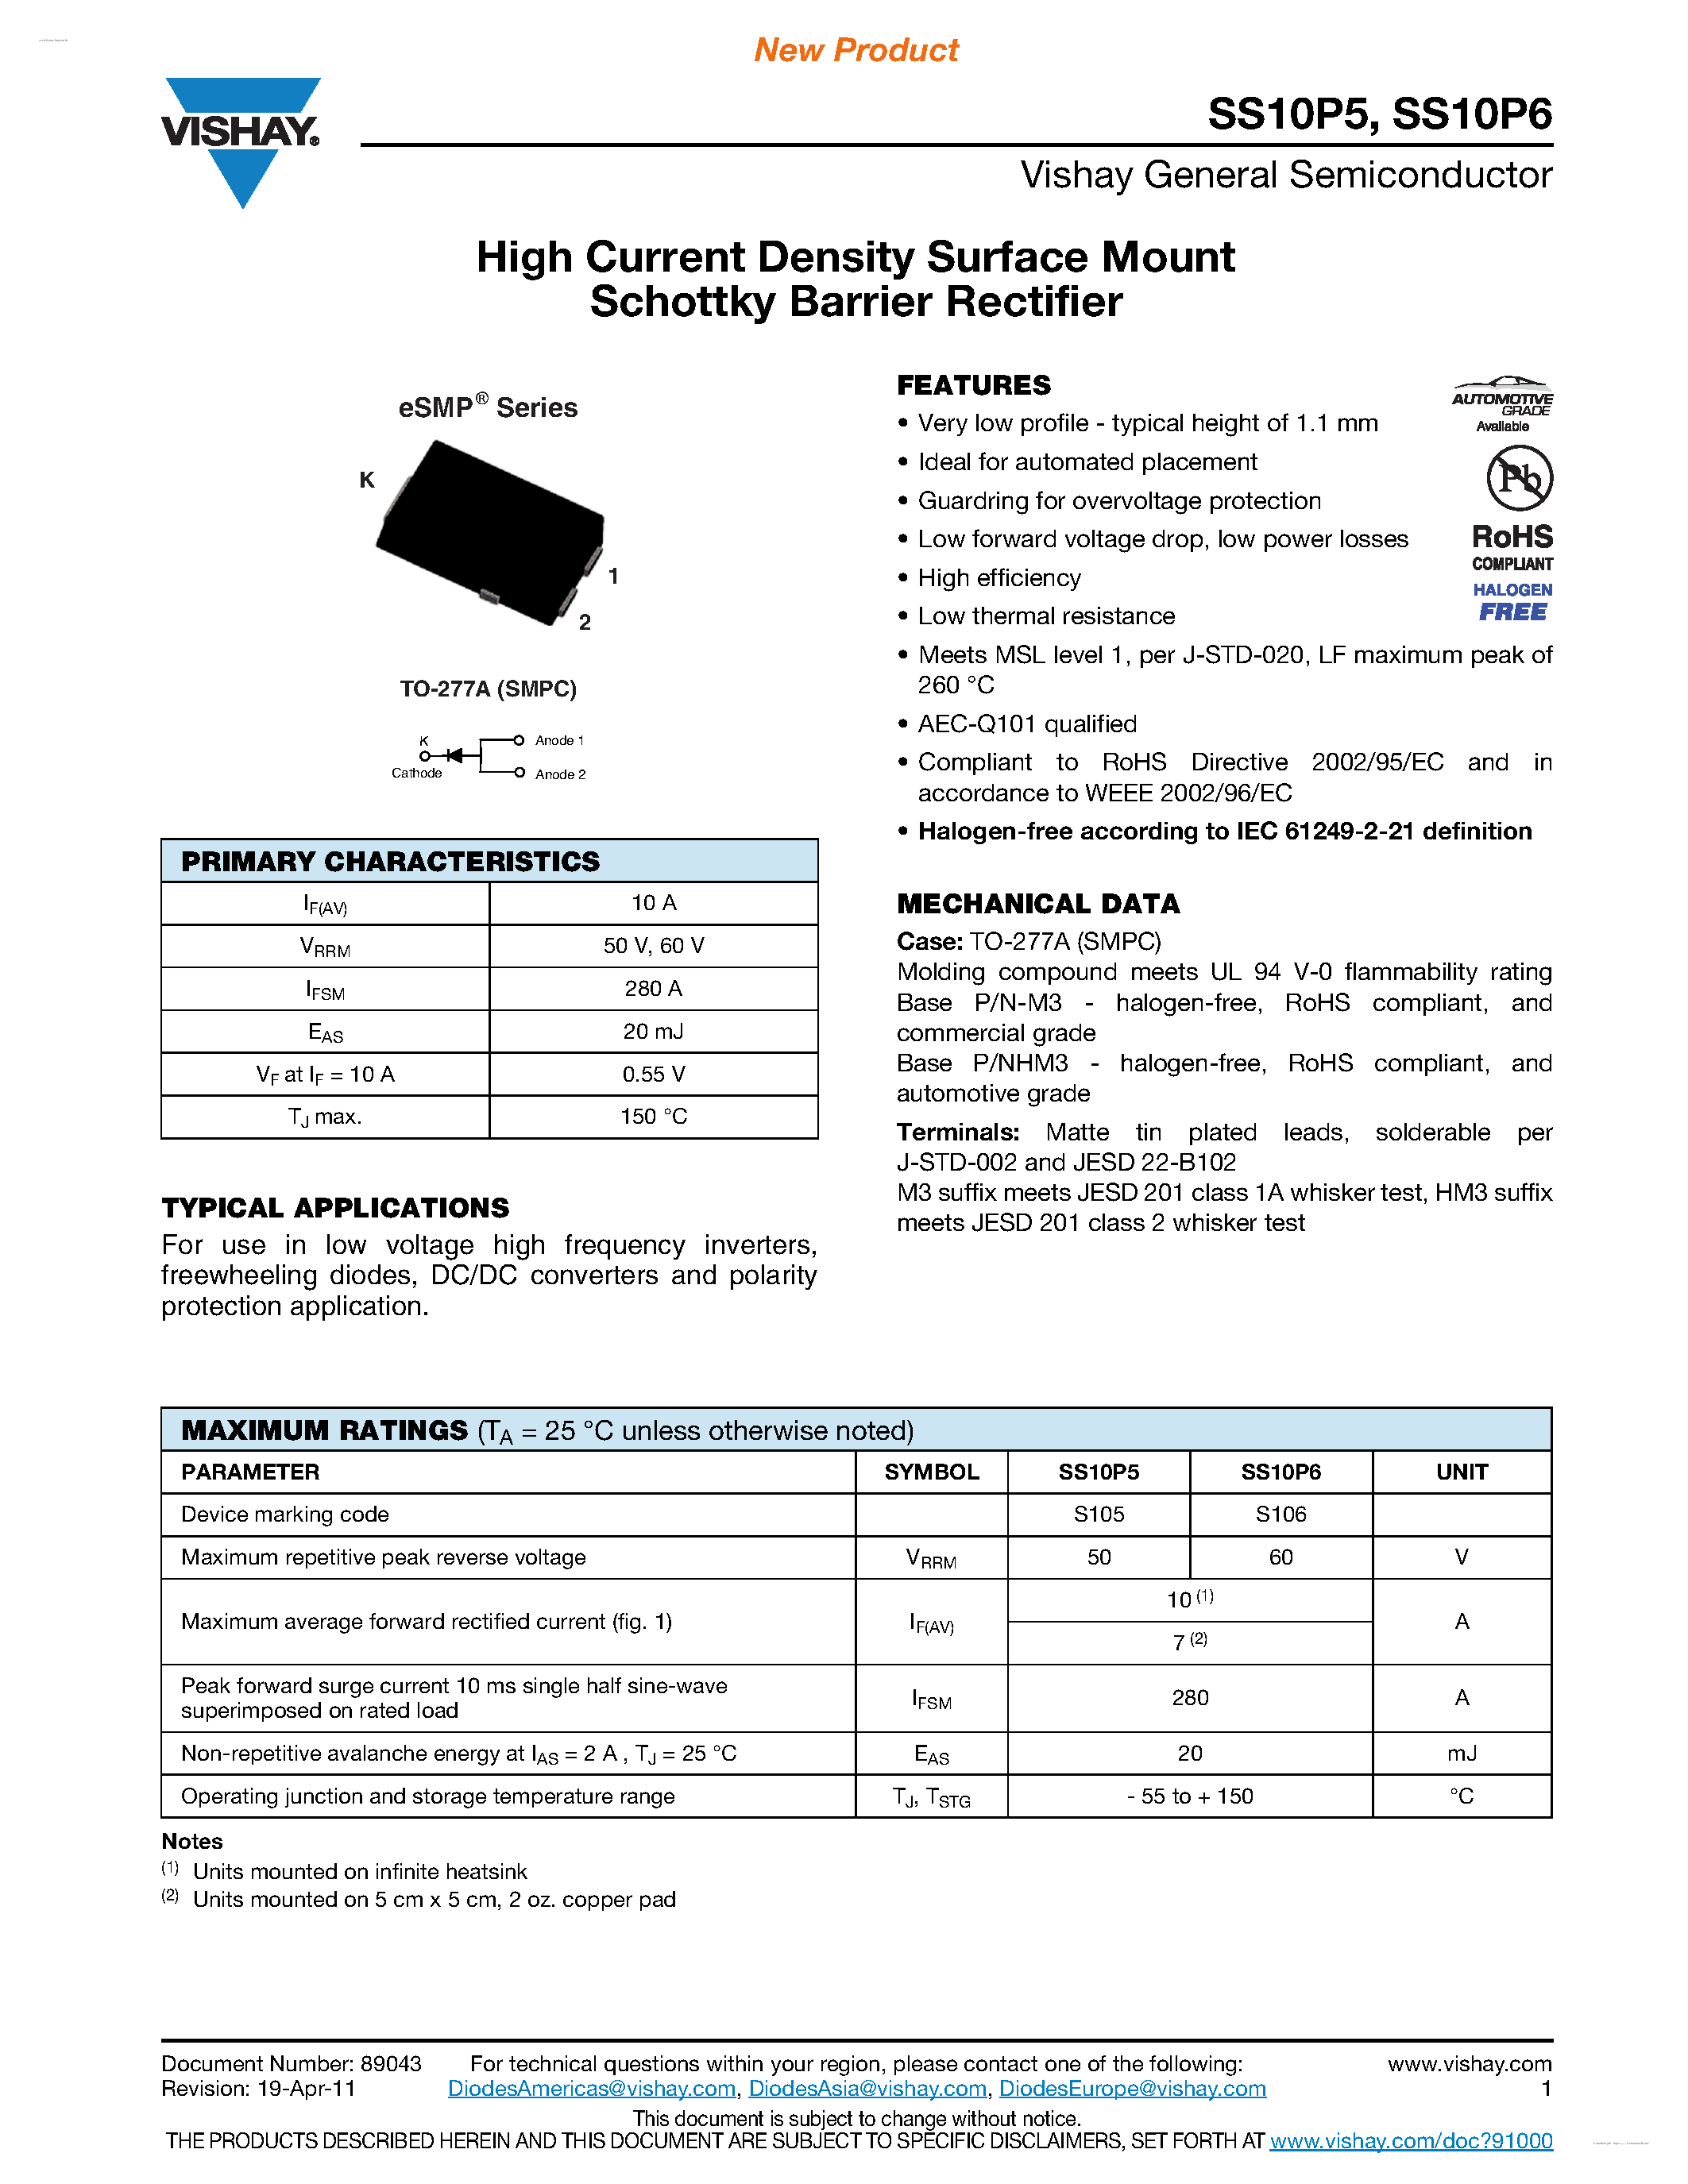 Даташит SS10P5-(SS10P5 / SS10P6) High Current Density Surface Mount Schottky Barrier Rectifier страница 1